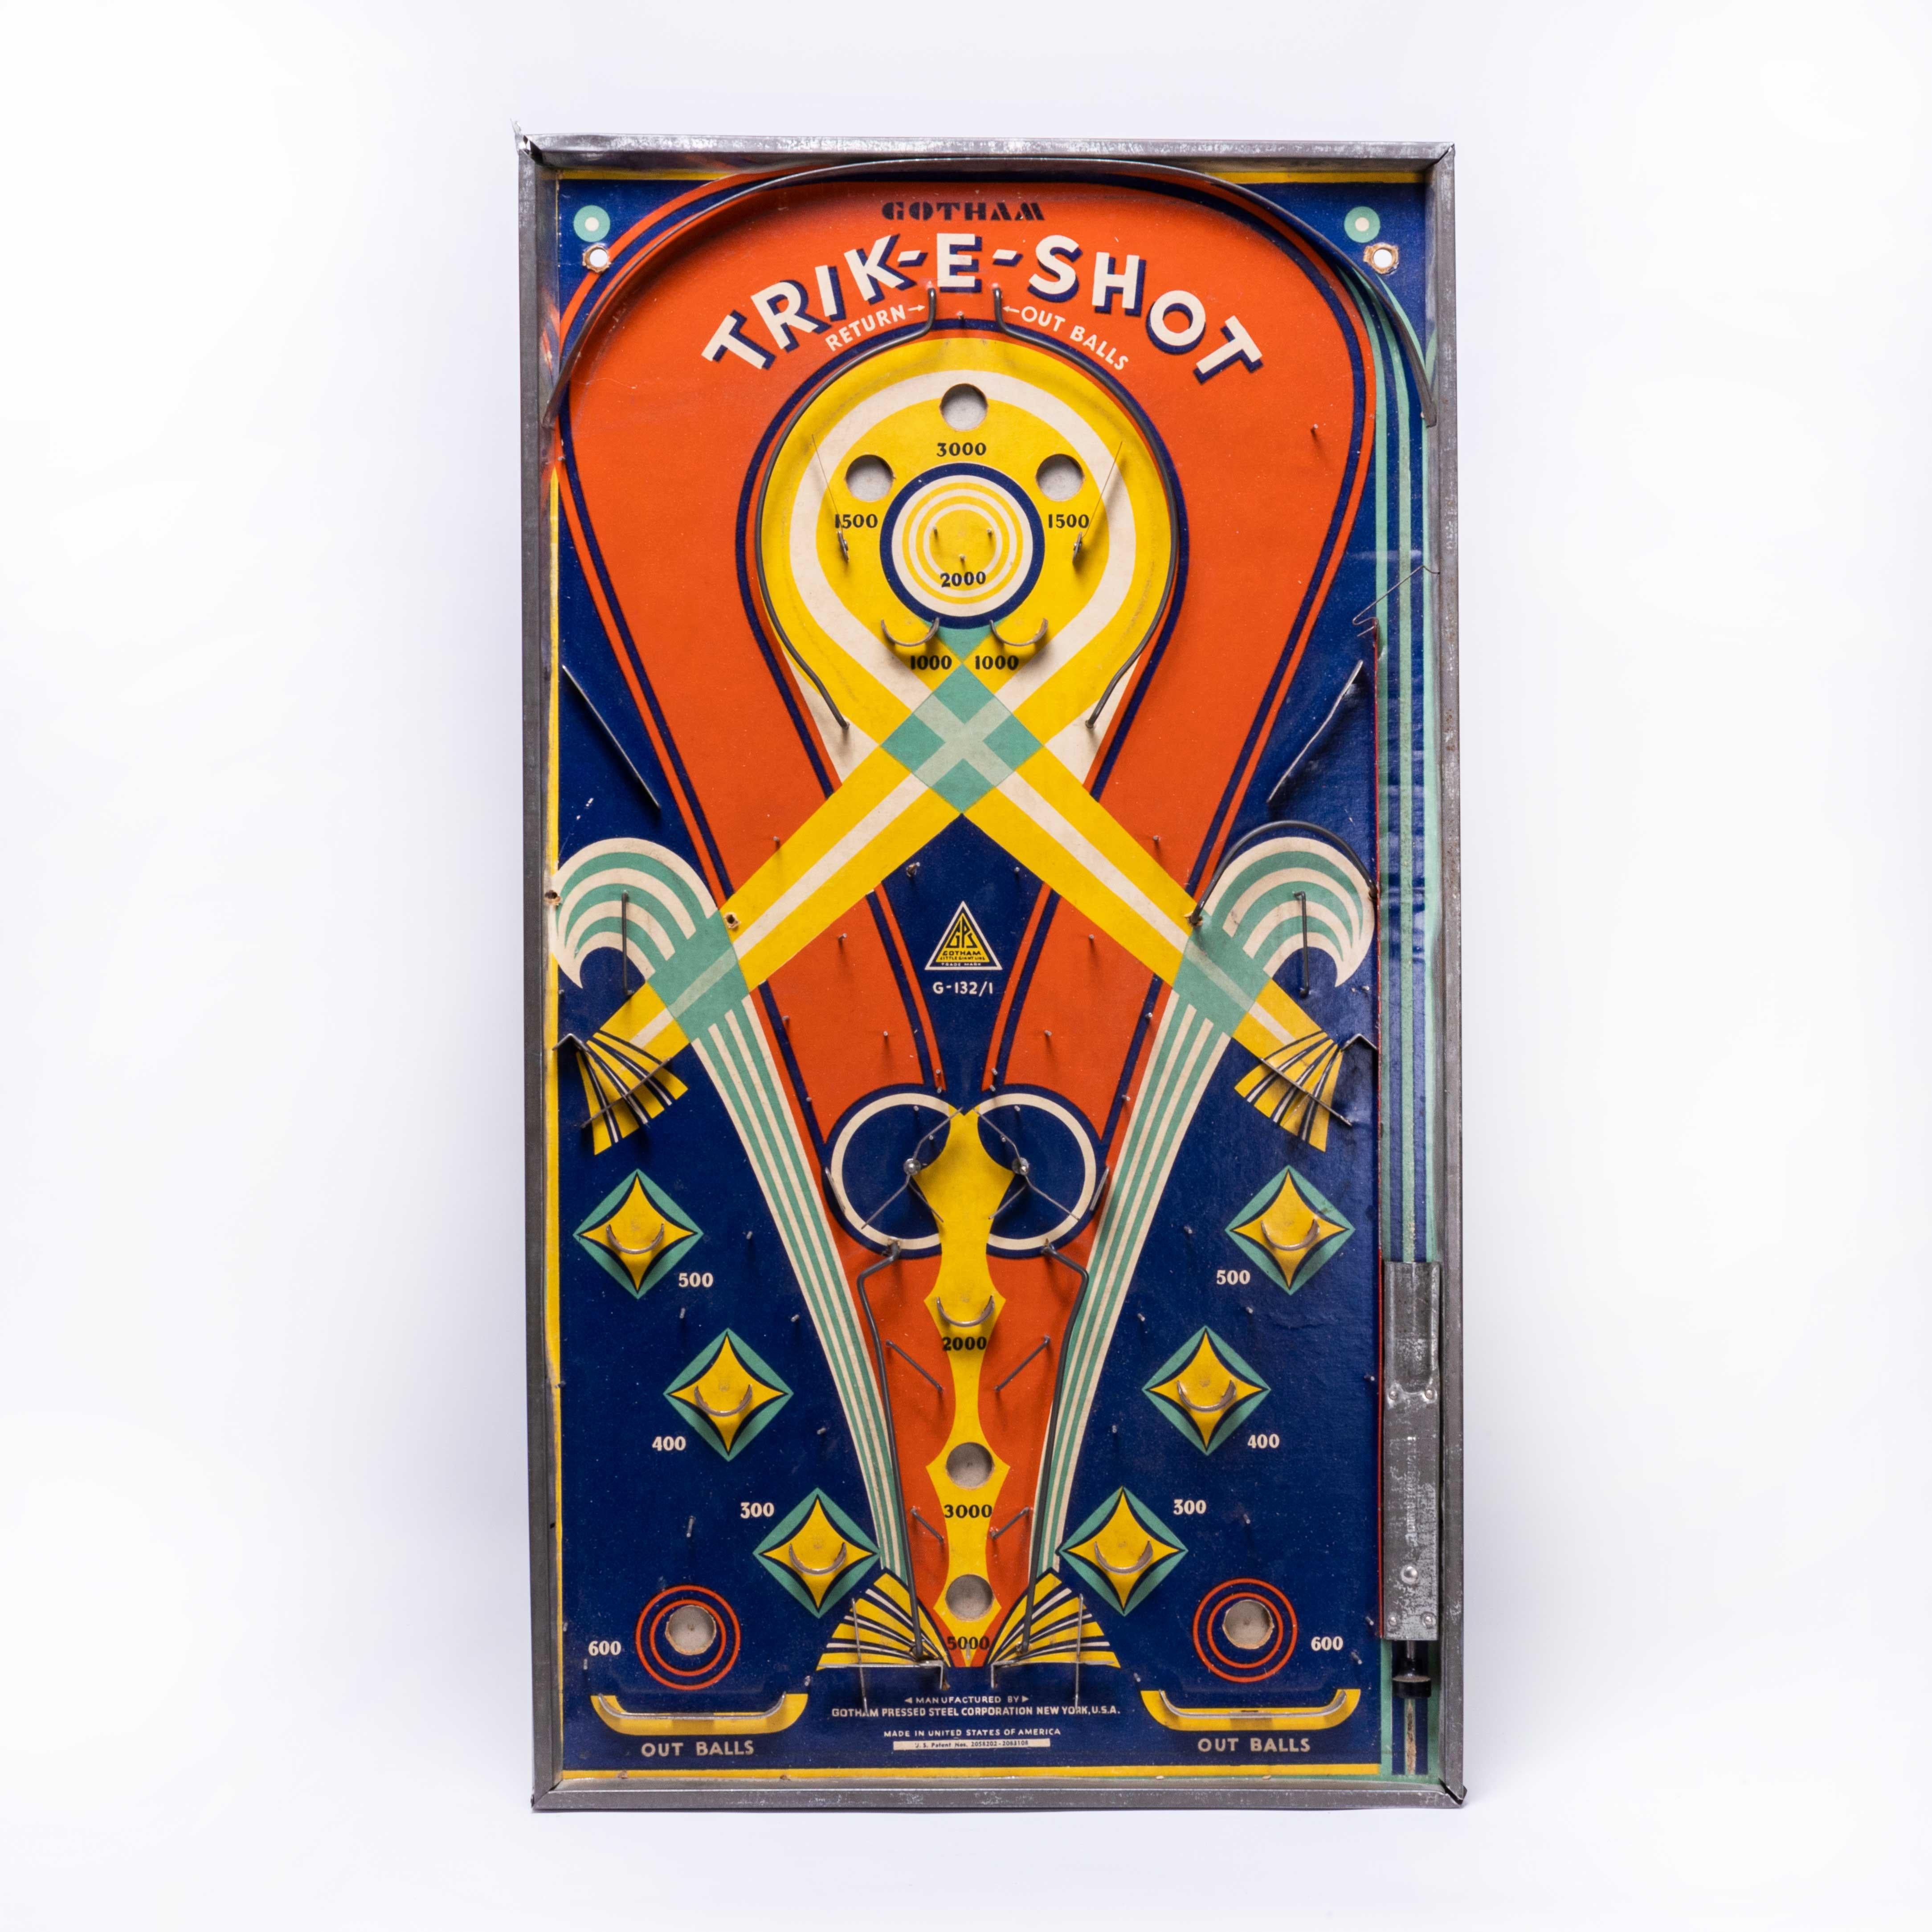 Rare American Gothum Trike-shot pinball
Rare American Gothum Trike-shot pinball. Made in America by Bagatelle in the early 19th Century. It has amazing graphics still with vibrant colour and a steel border all round. In amazing condition, it works